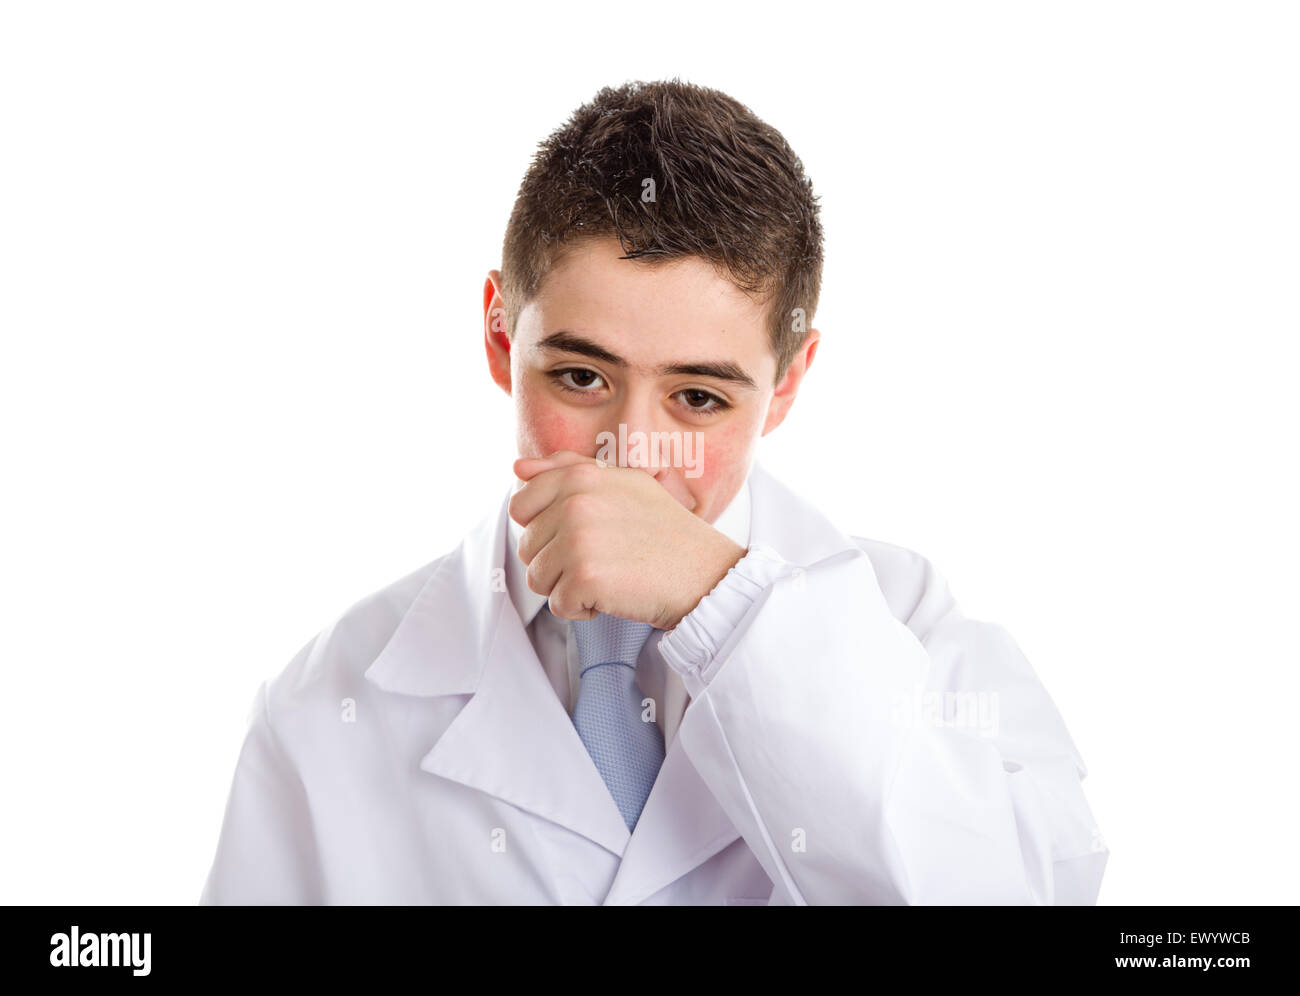 A boy doctor in white coat and blue tie helps to feel medicine more friendly: he is touching his nose. His acne skin has not ben retouched Stock Photo